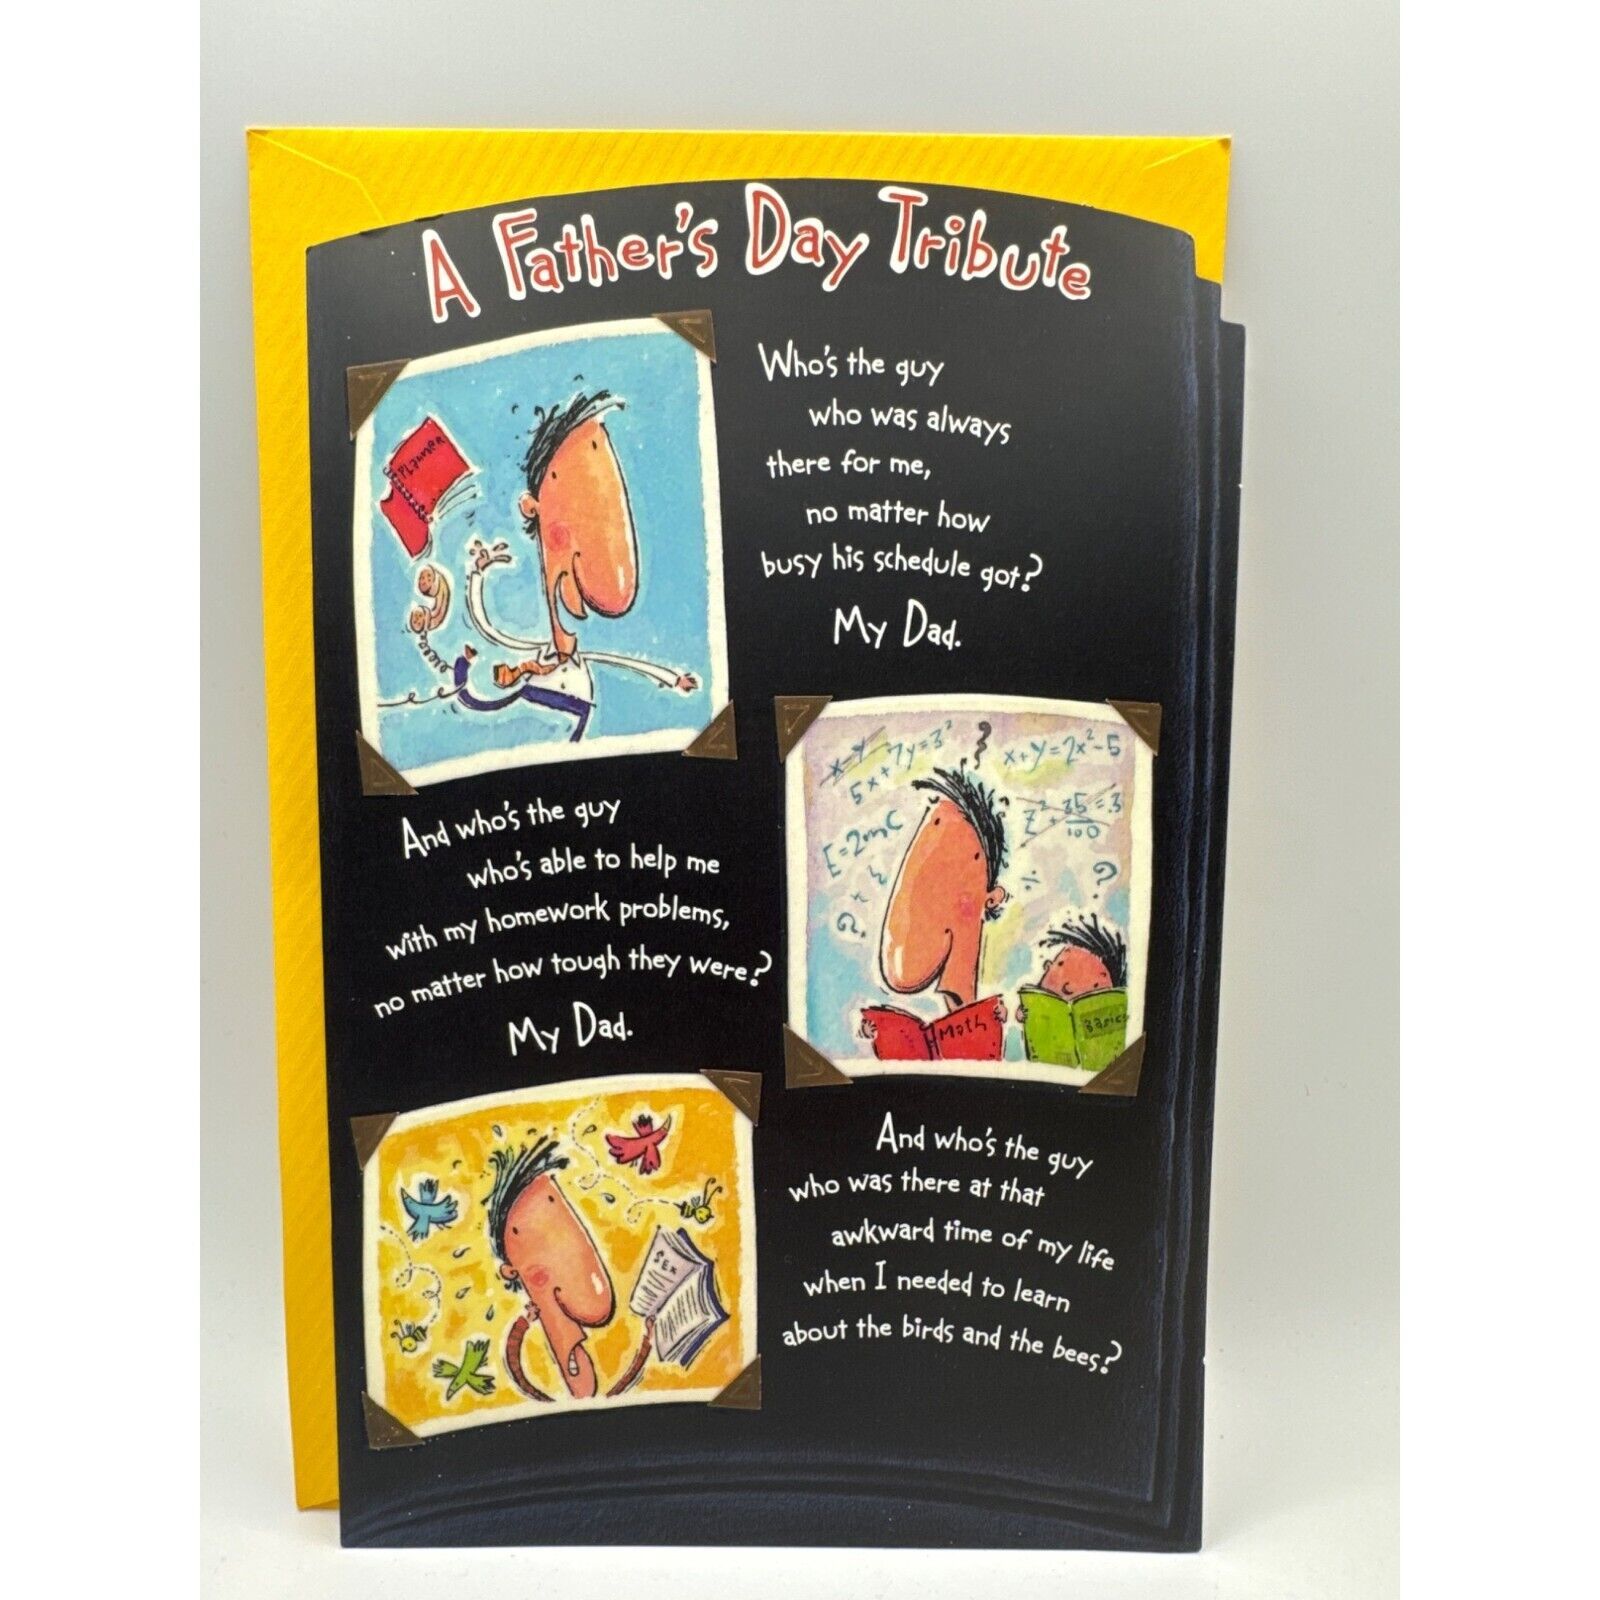 American Greetings Forget me Not Fathers Day Greeting Card Fathers Day Tribute - $5.93